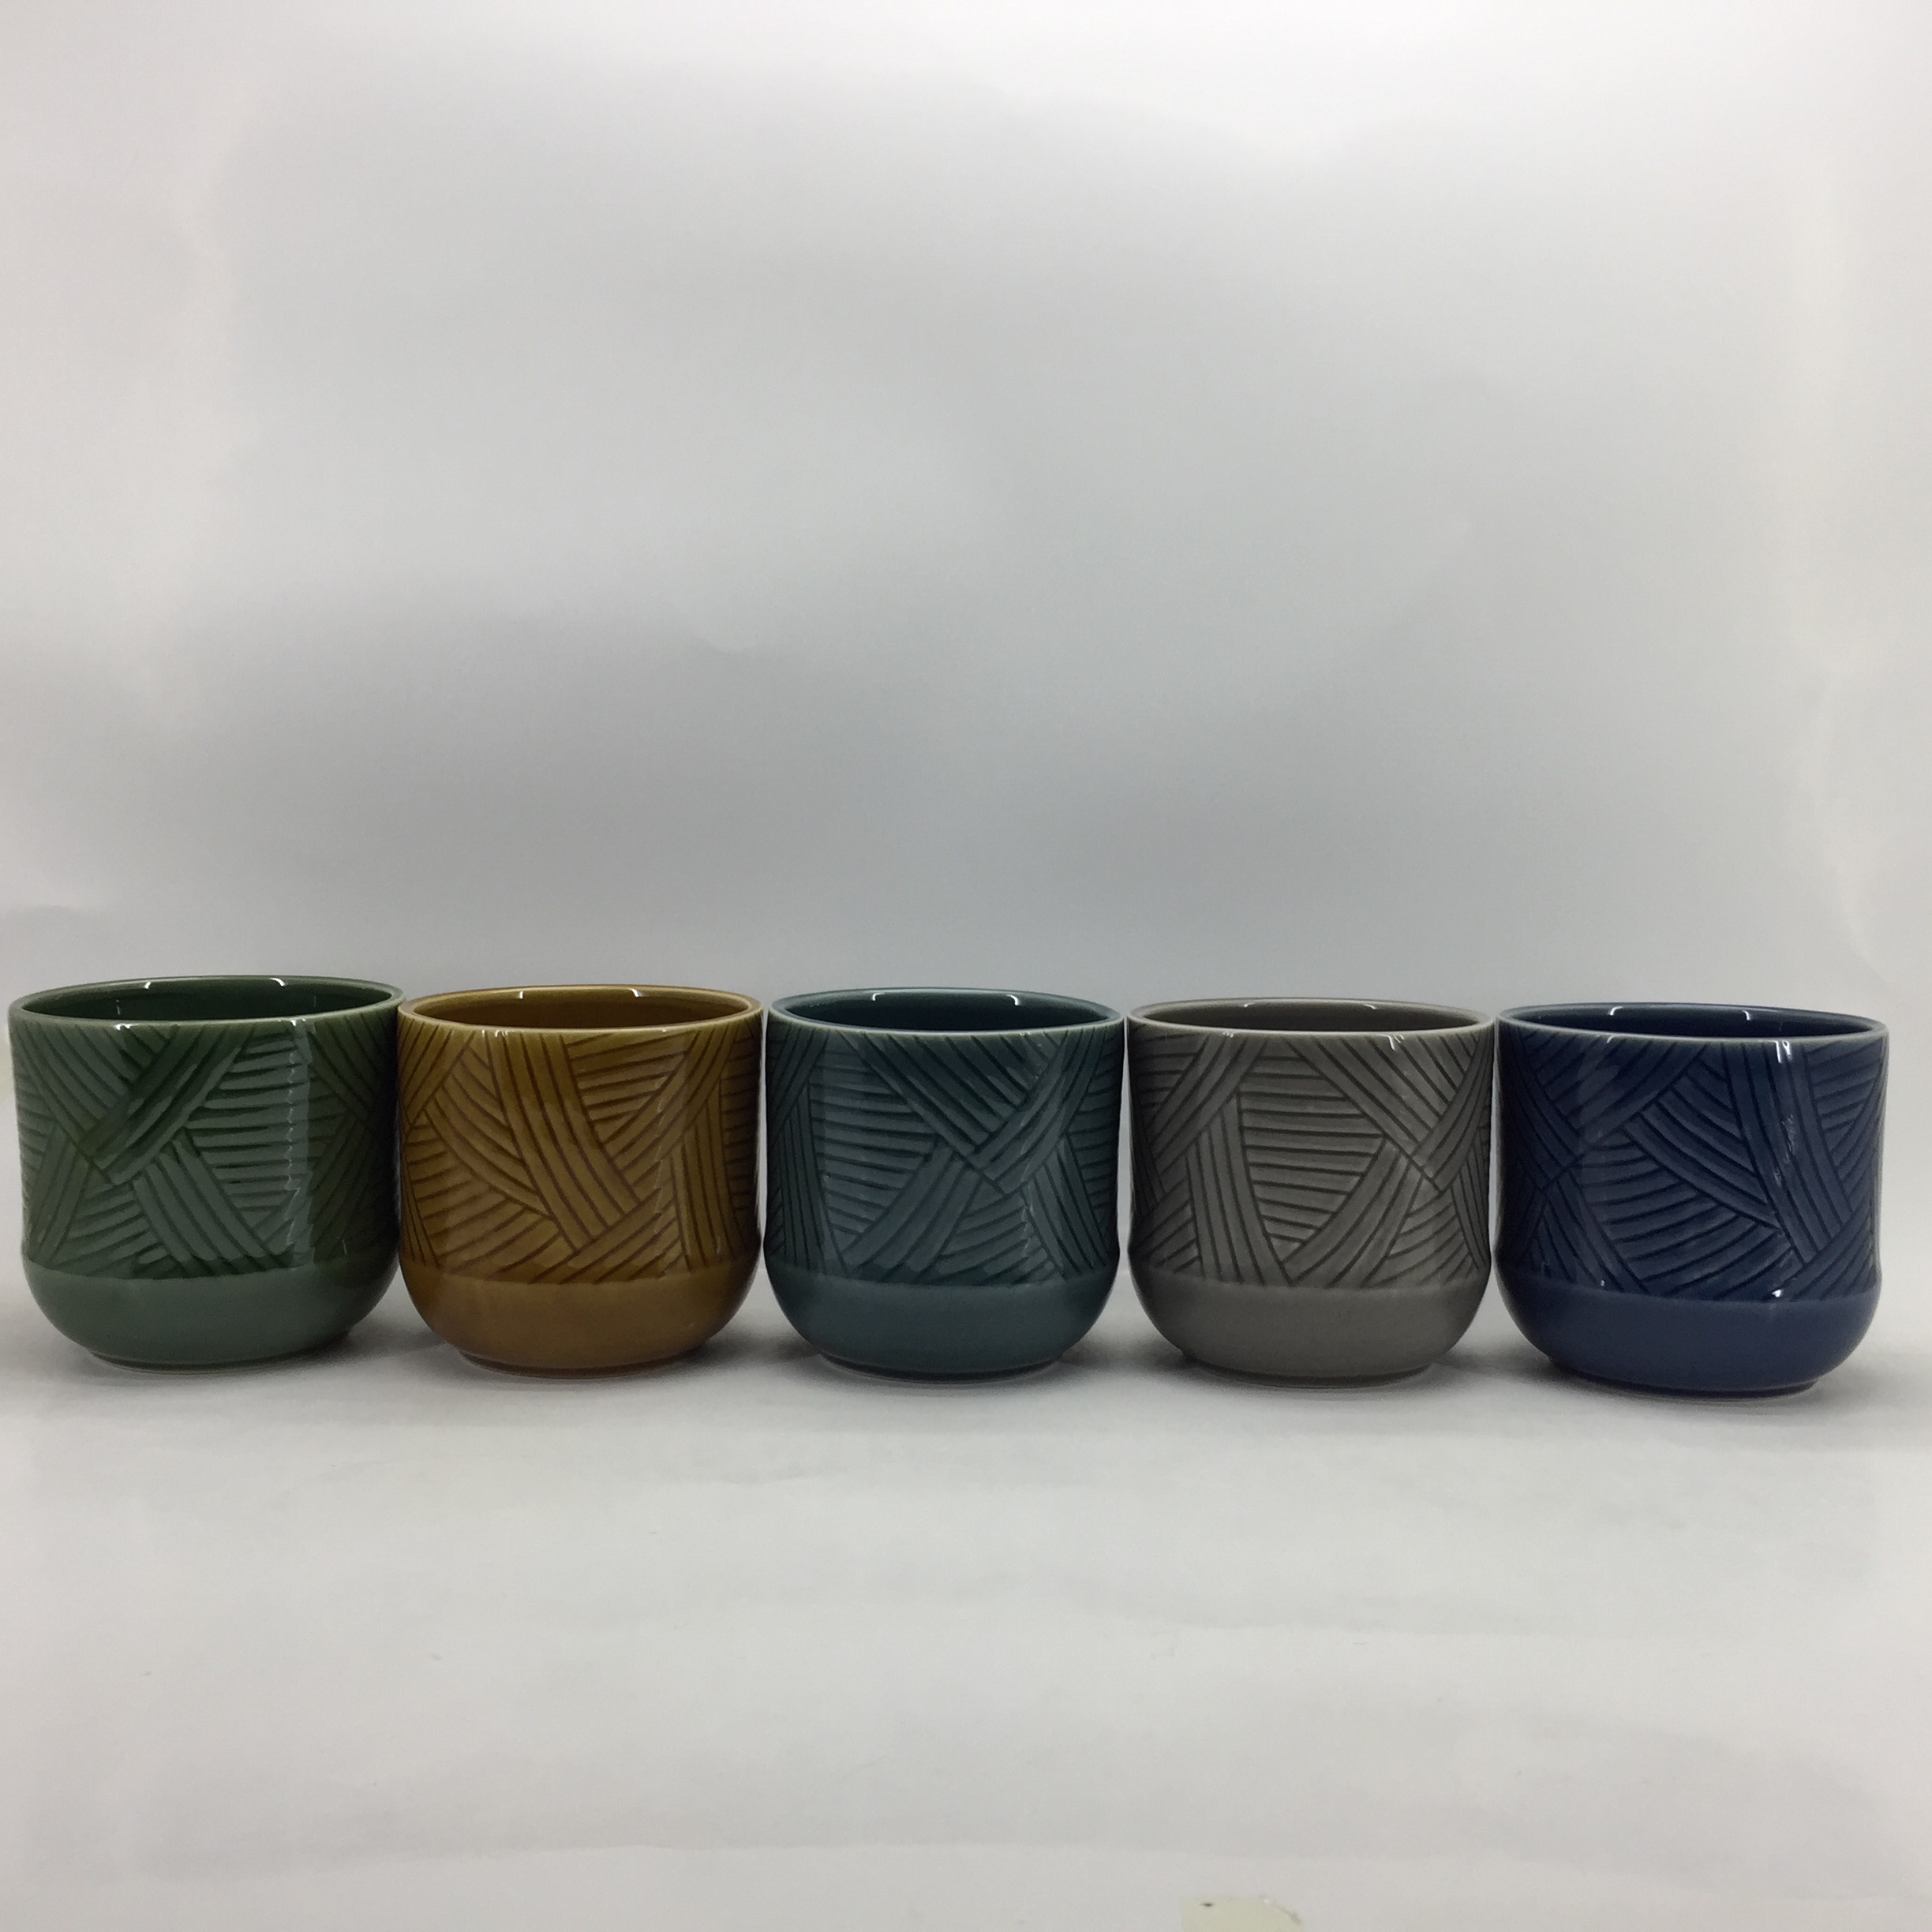 Set of 5 Ceramic Flower Pots with Round Bottom Planters